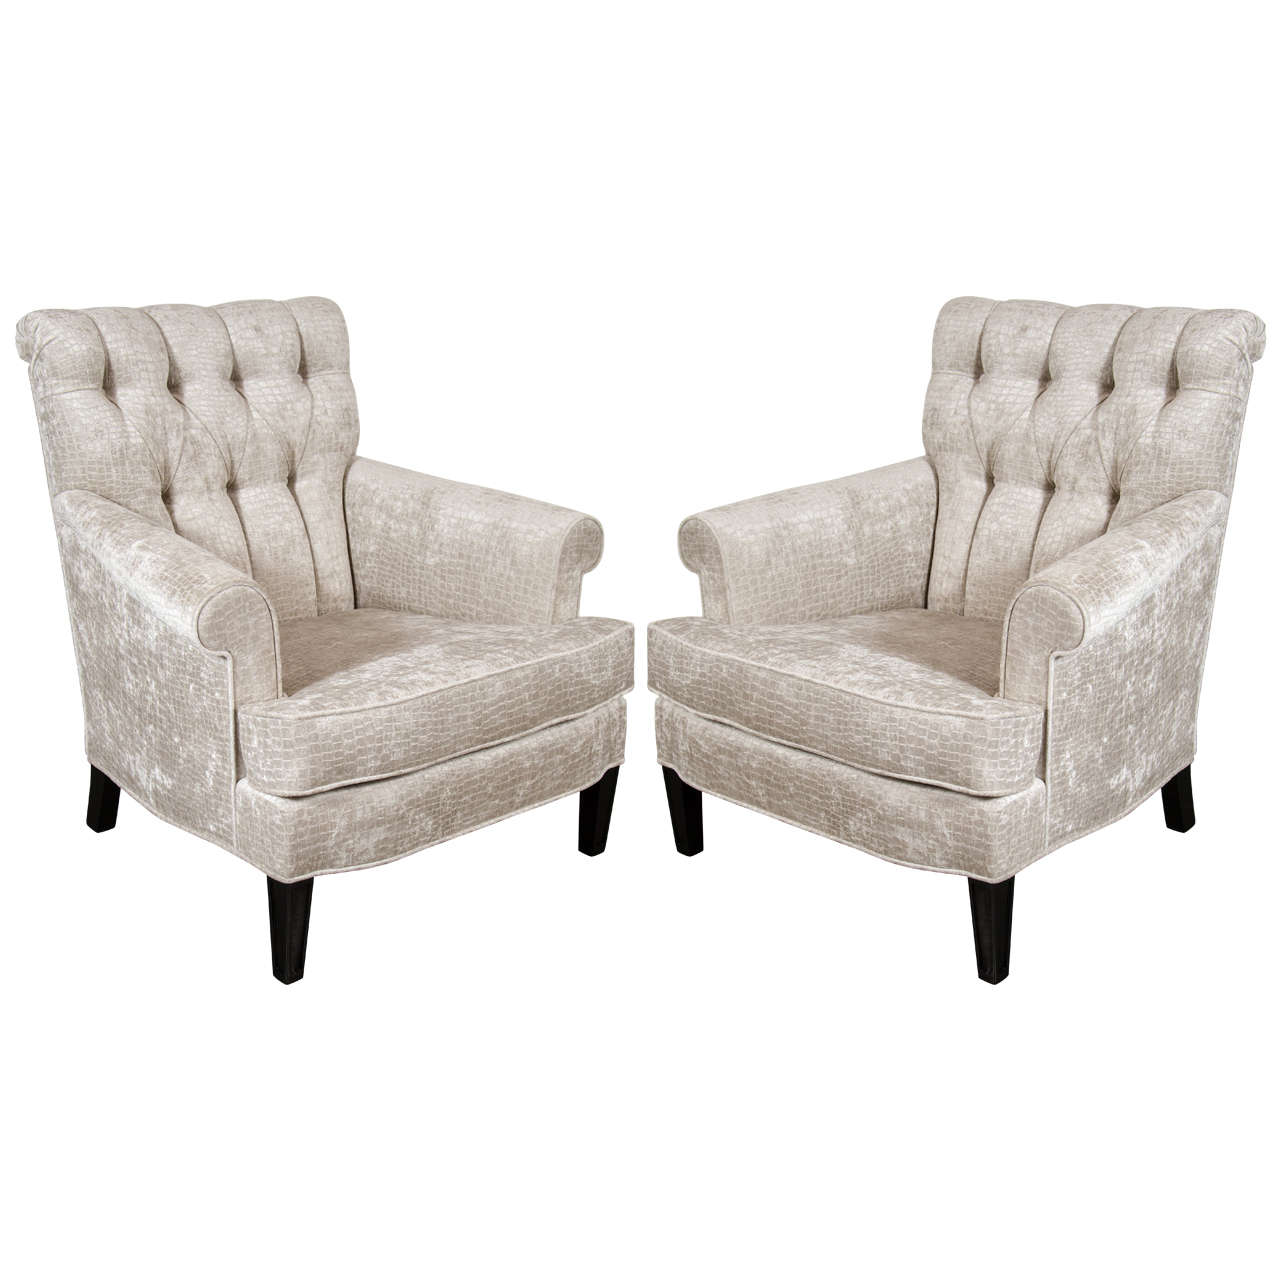 Pair of Mid-Century Tufted Back Scroll-Arm Club Chairs in Crocodile Velvet